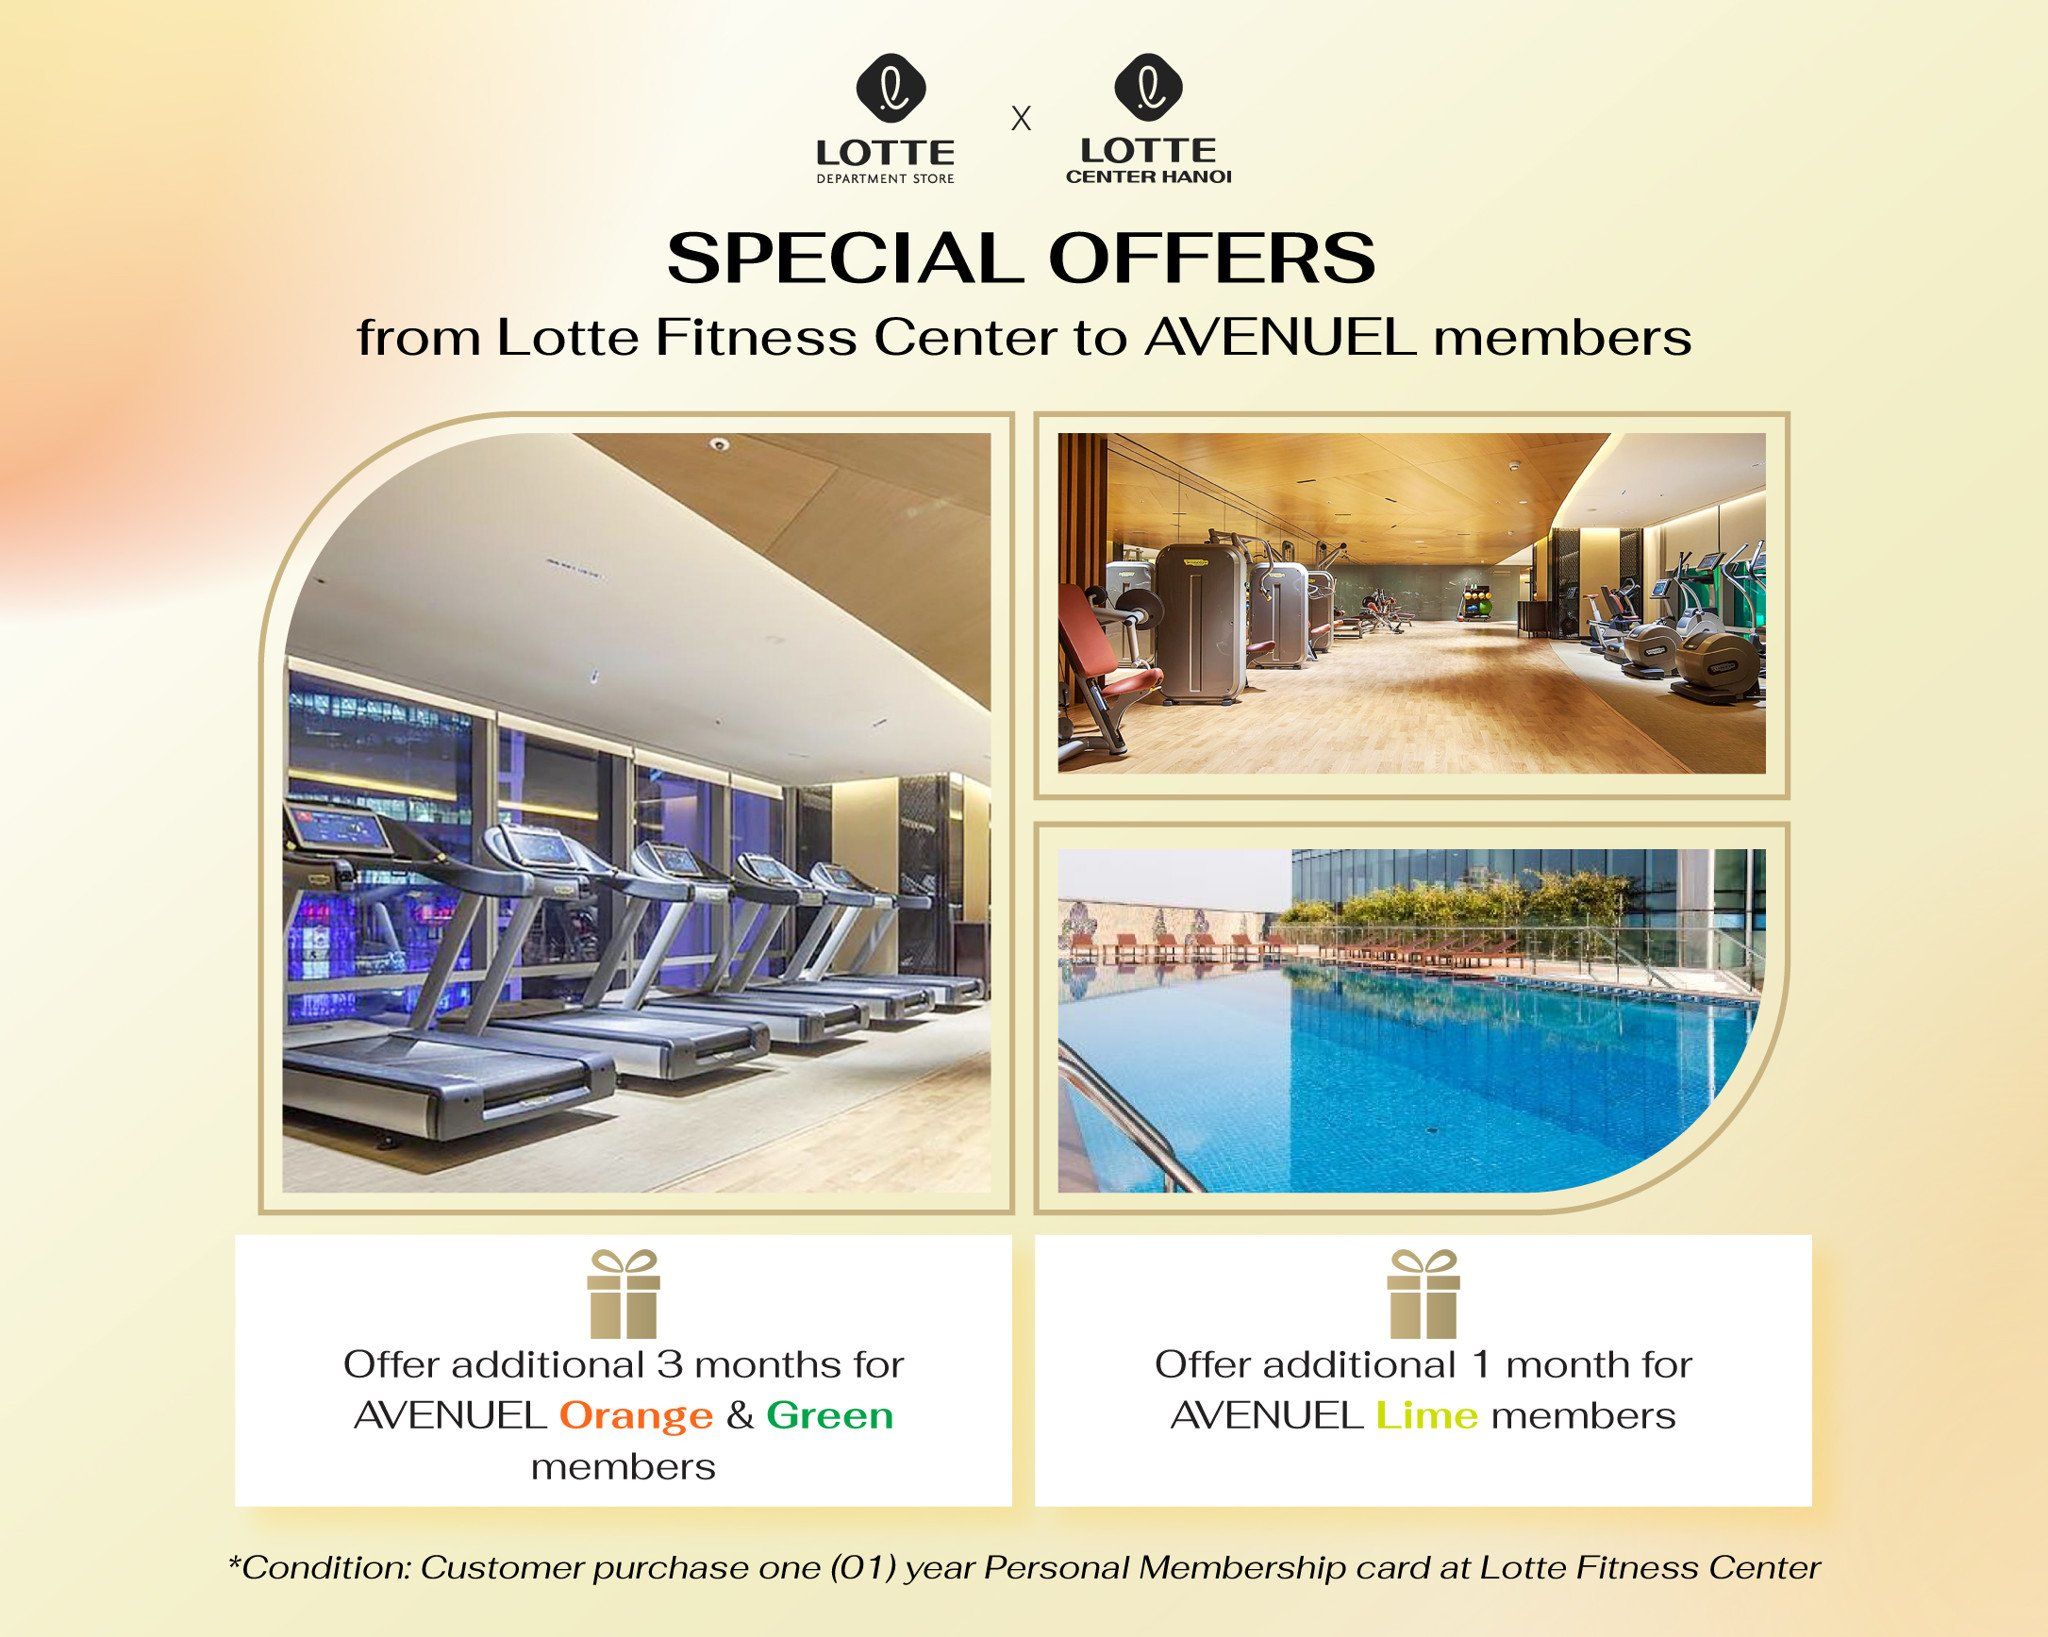 Sepcial Offers from LOTTE Fitness Center to AVENUEL members